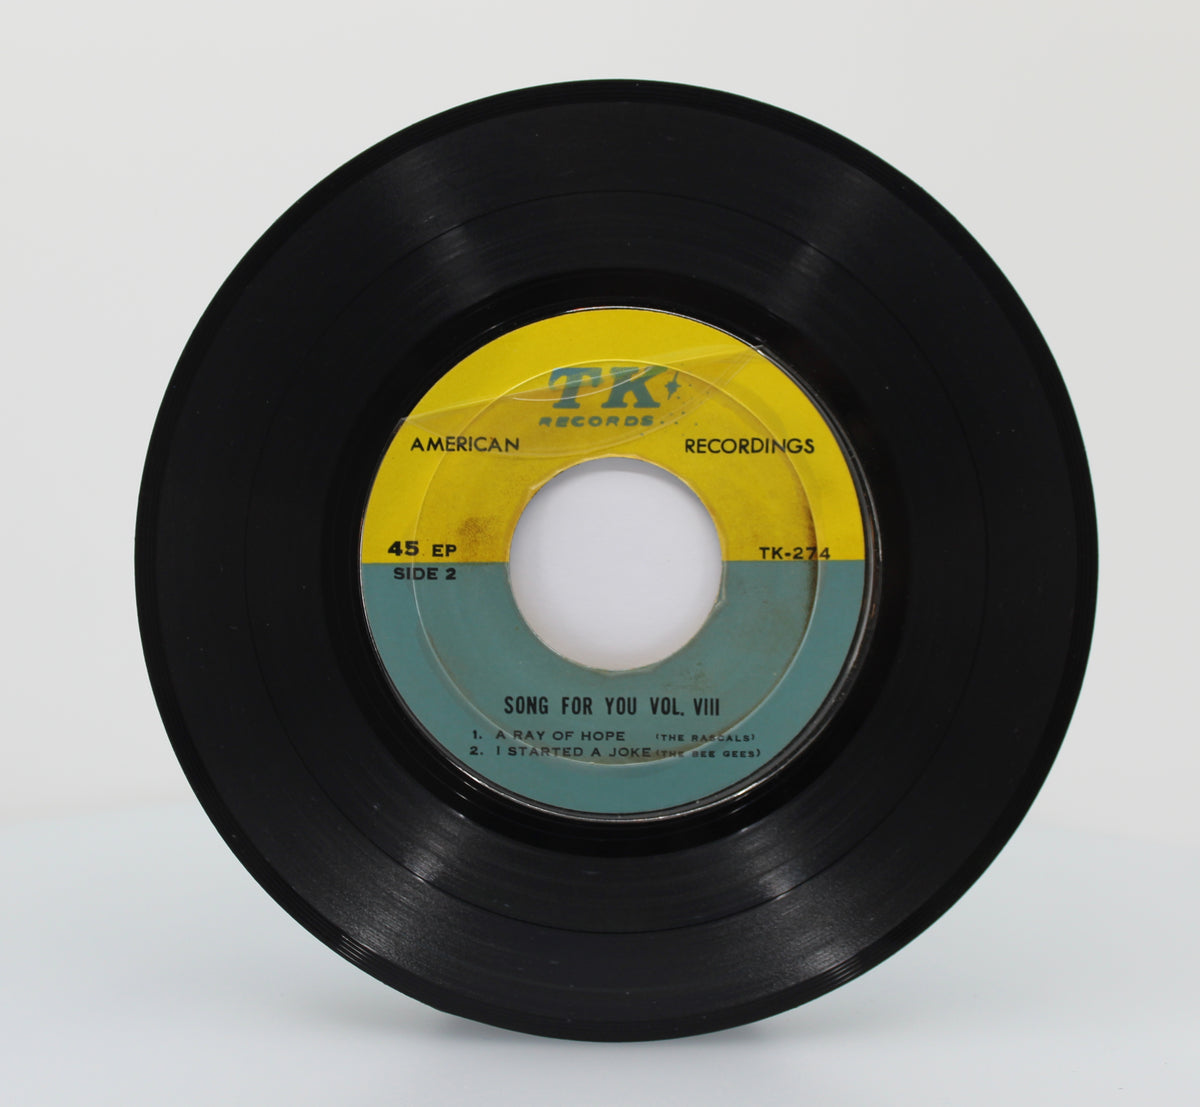 Bee Gees - I Started A Joke, Vinyl, Single (45rpm), Thailand